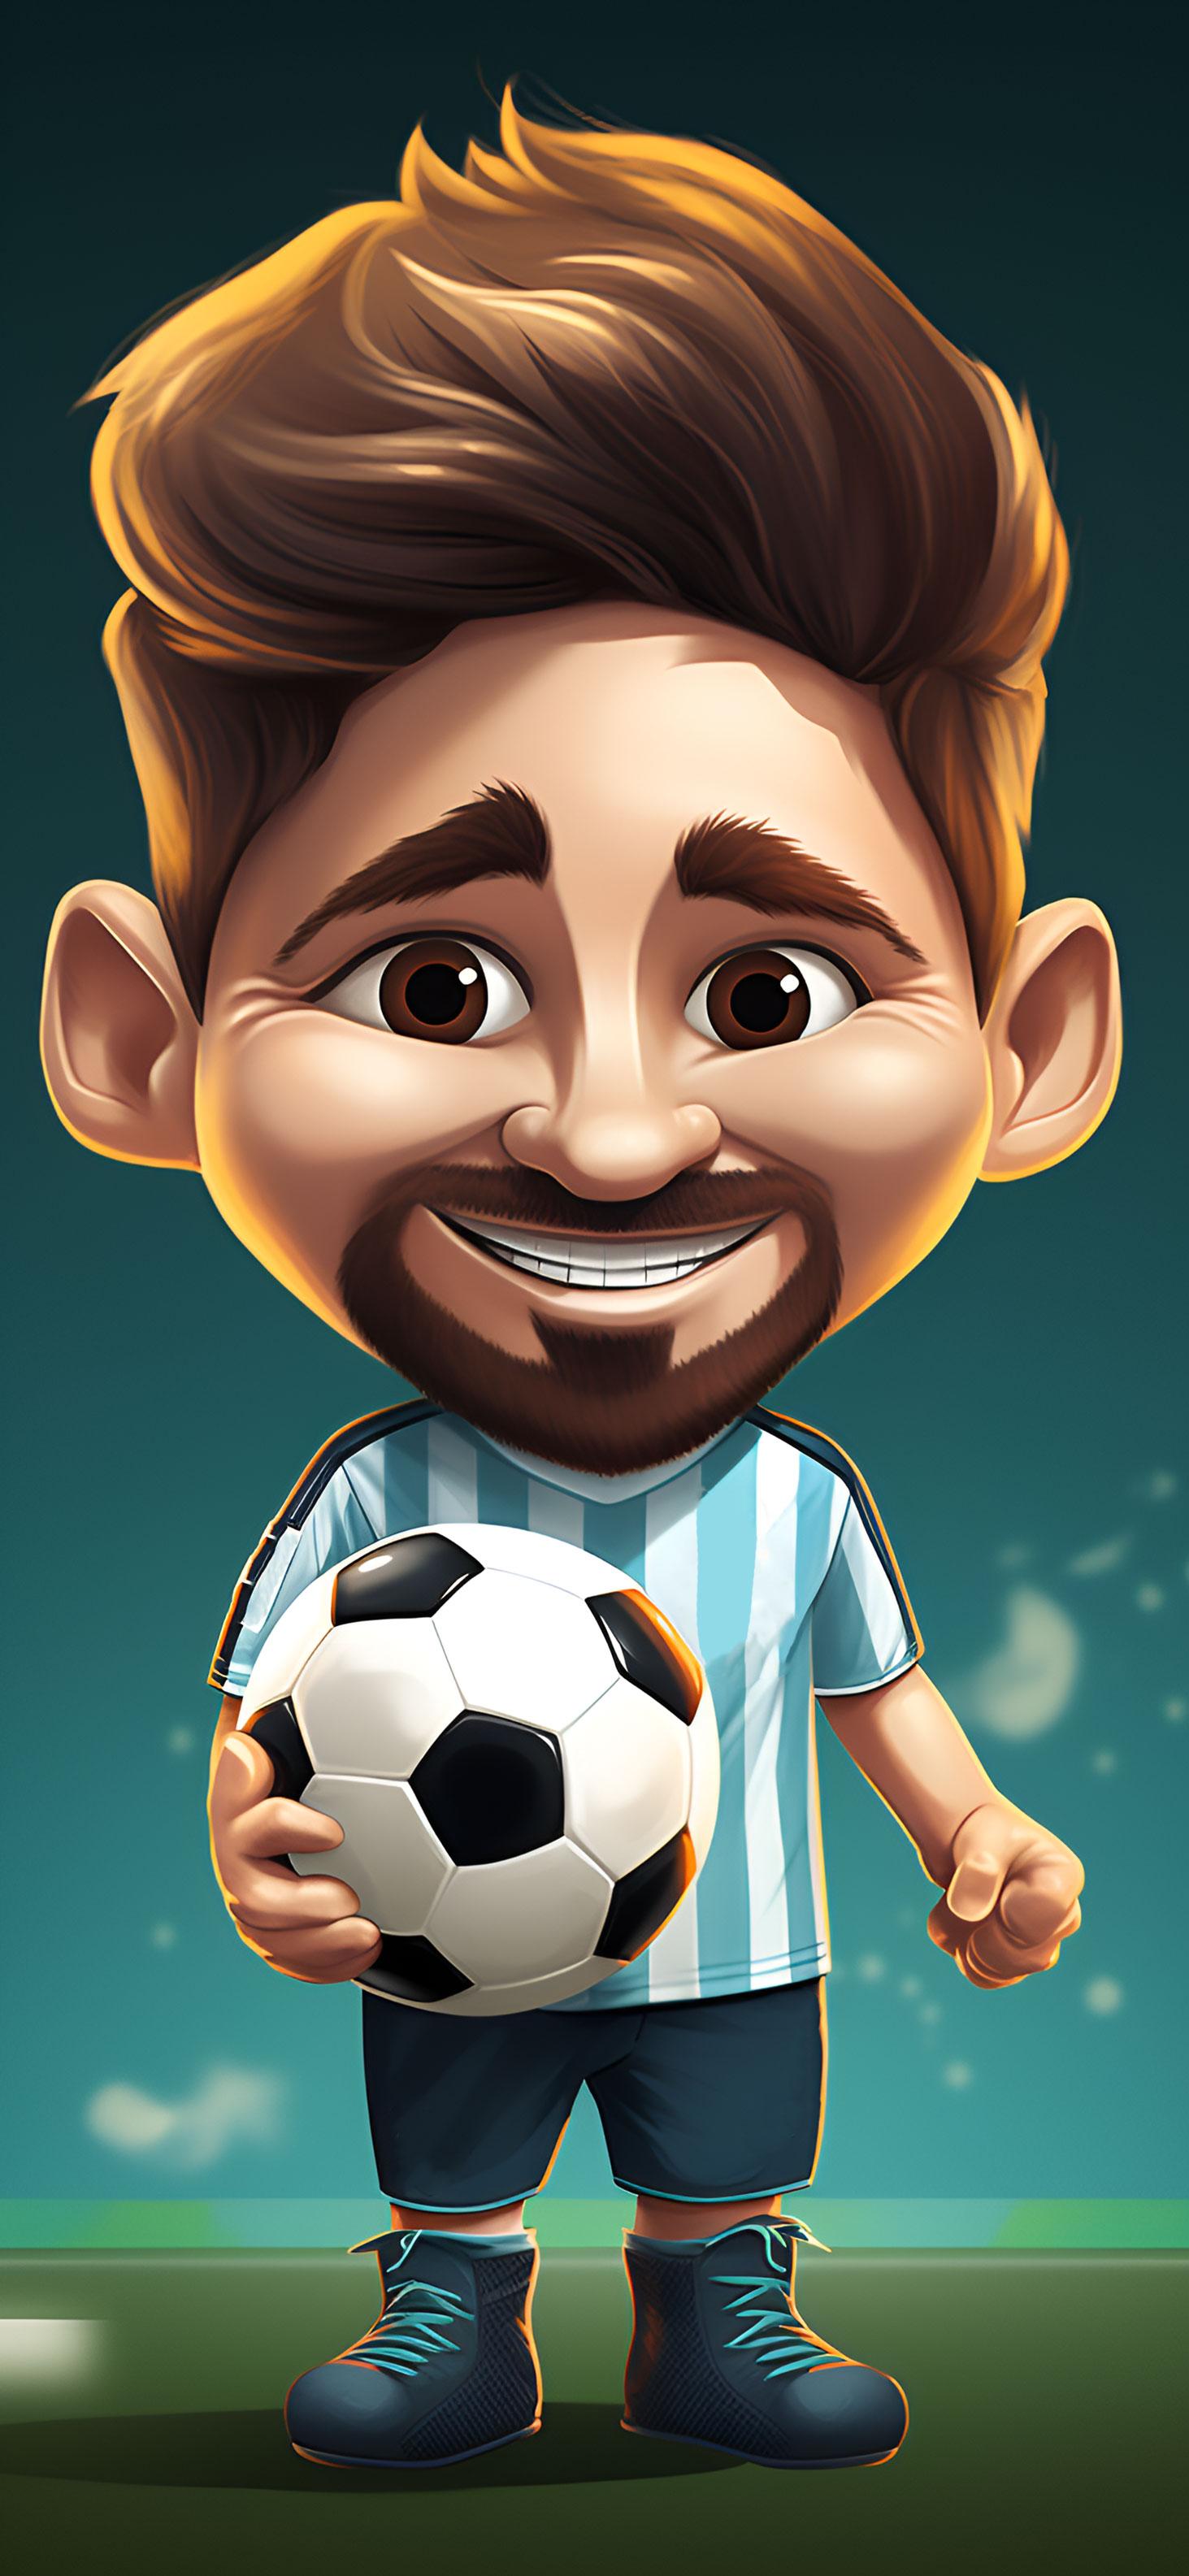 Chibi Lionel Messi Wallpapers   Cute and Funny Messi Wallpapers